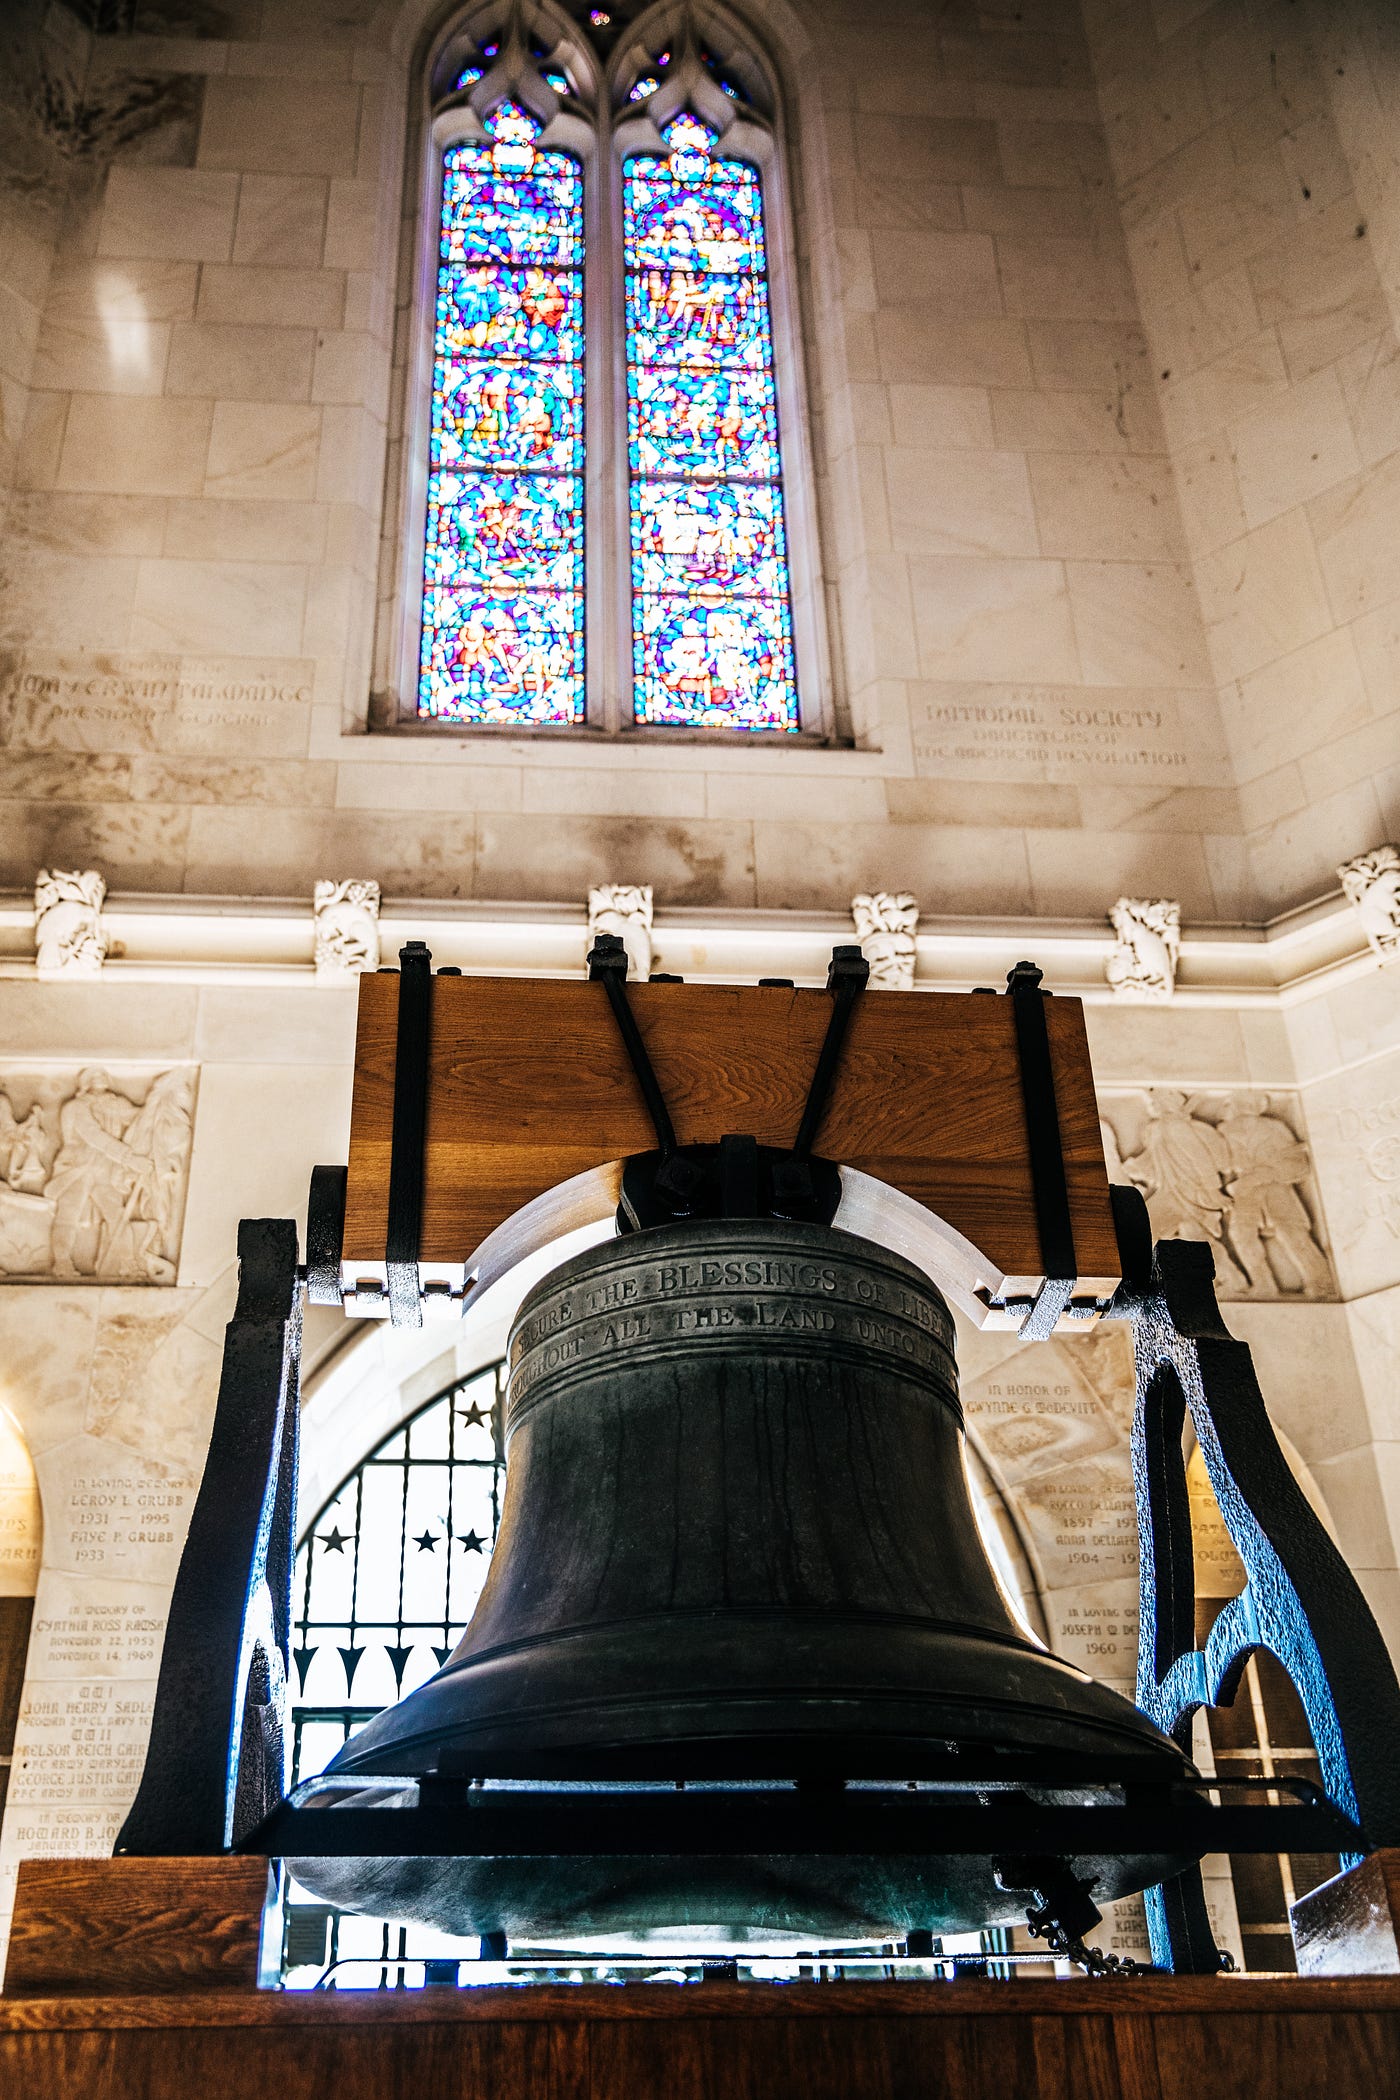 Church bell ringing explained - Rest Less